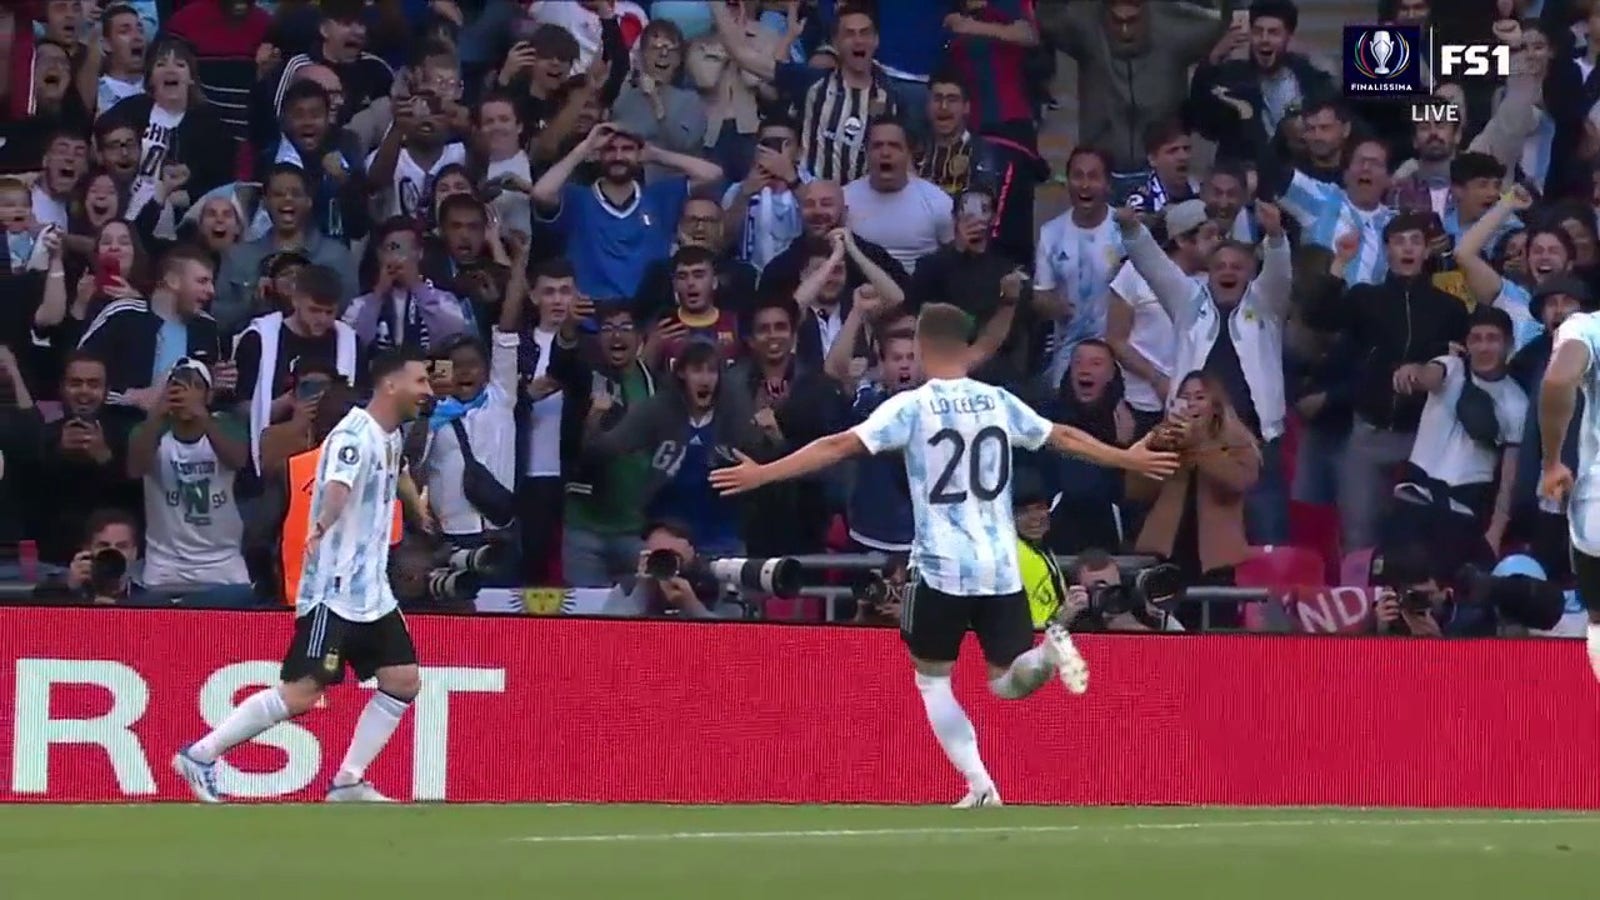 Lionel Messi finds Lautaro Martinez who puts in a goal to give Argentina an early 1-0 lead